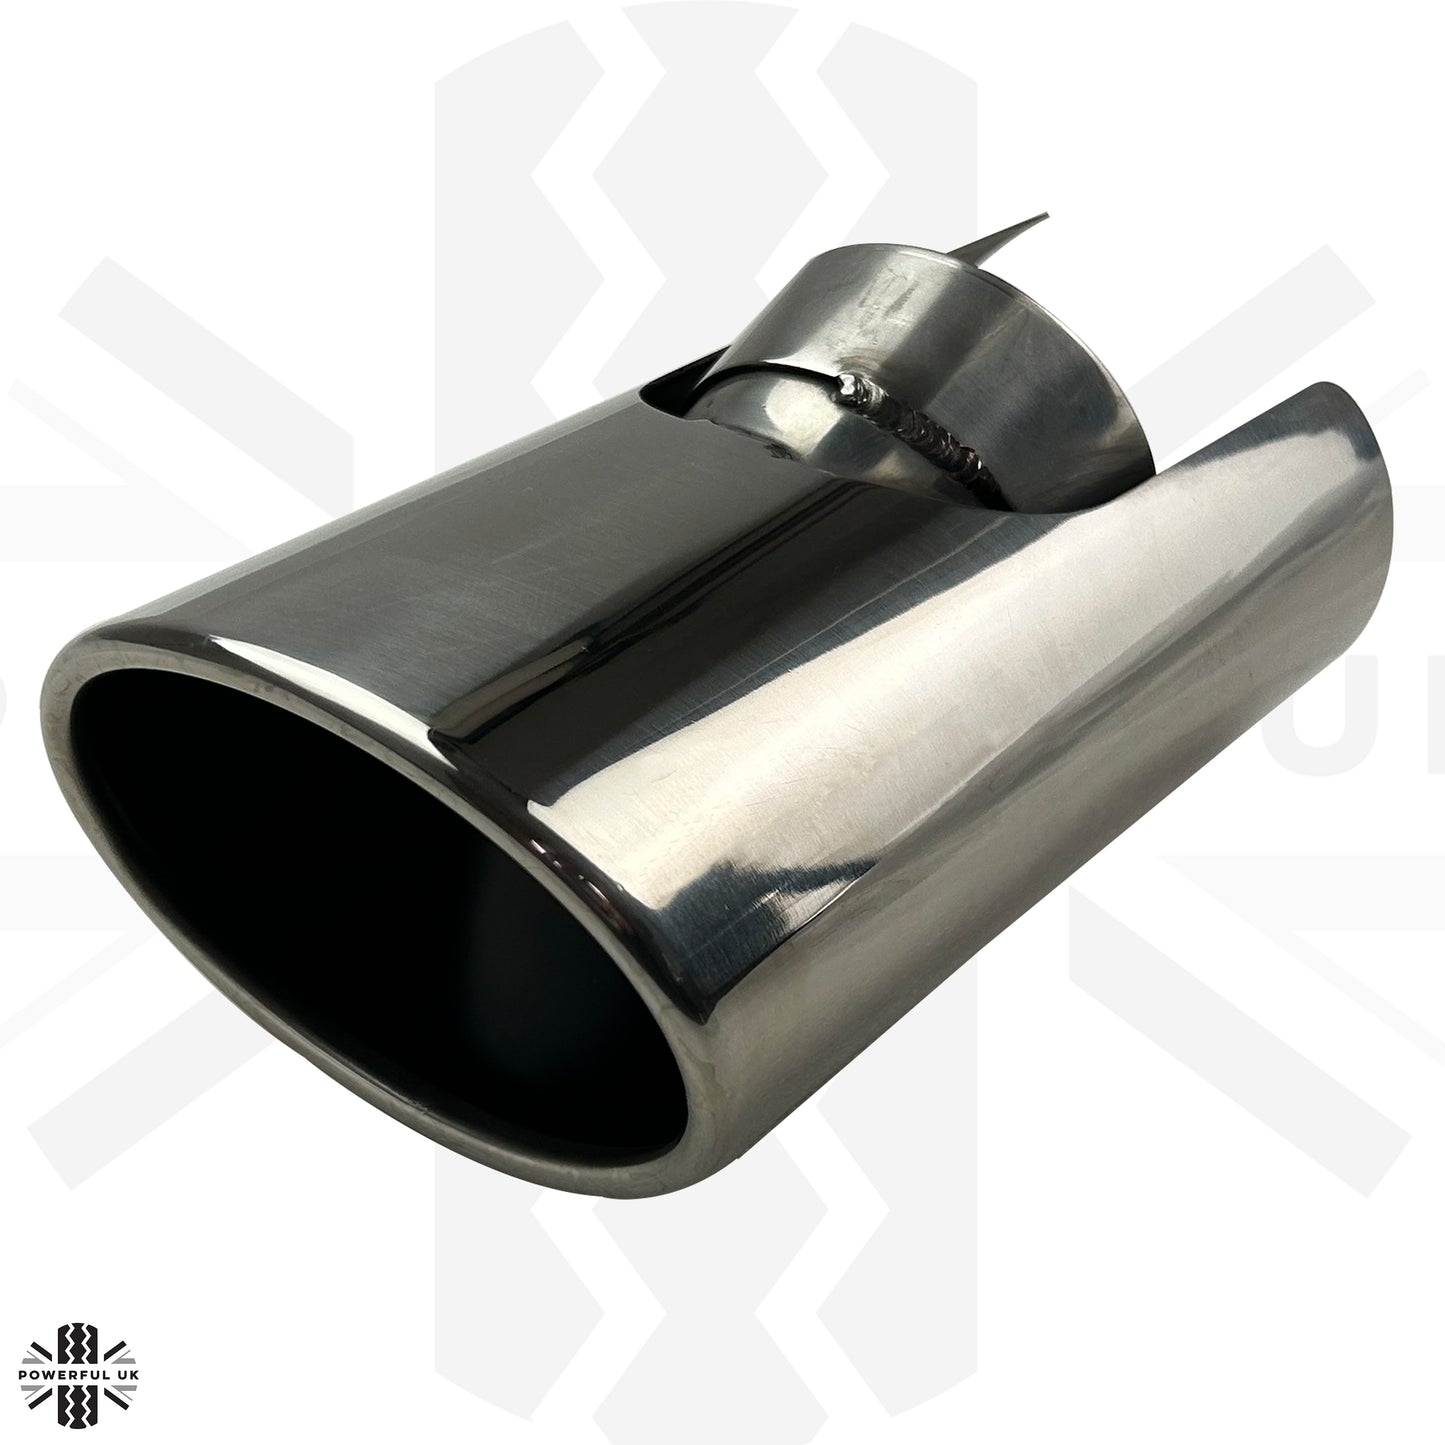 Exhaust Tailpipe HST/Dynamic Style Stainless for Land Rover Freelander 2 Diesel (Genuine)